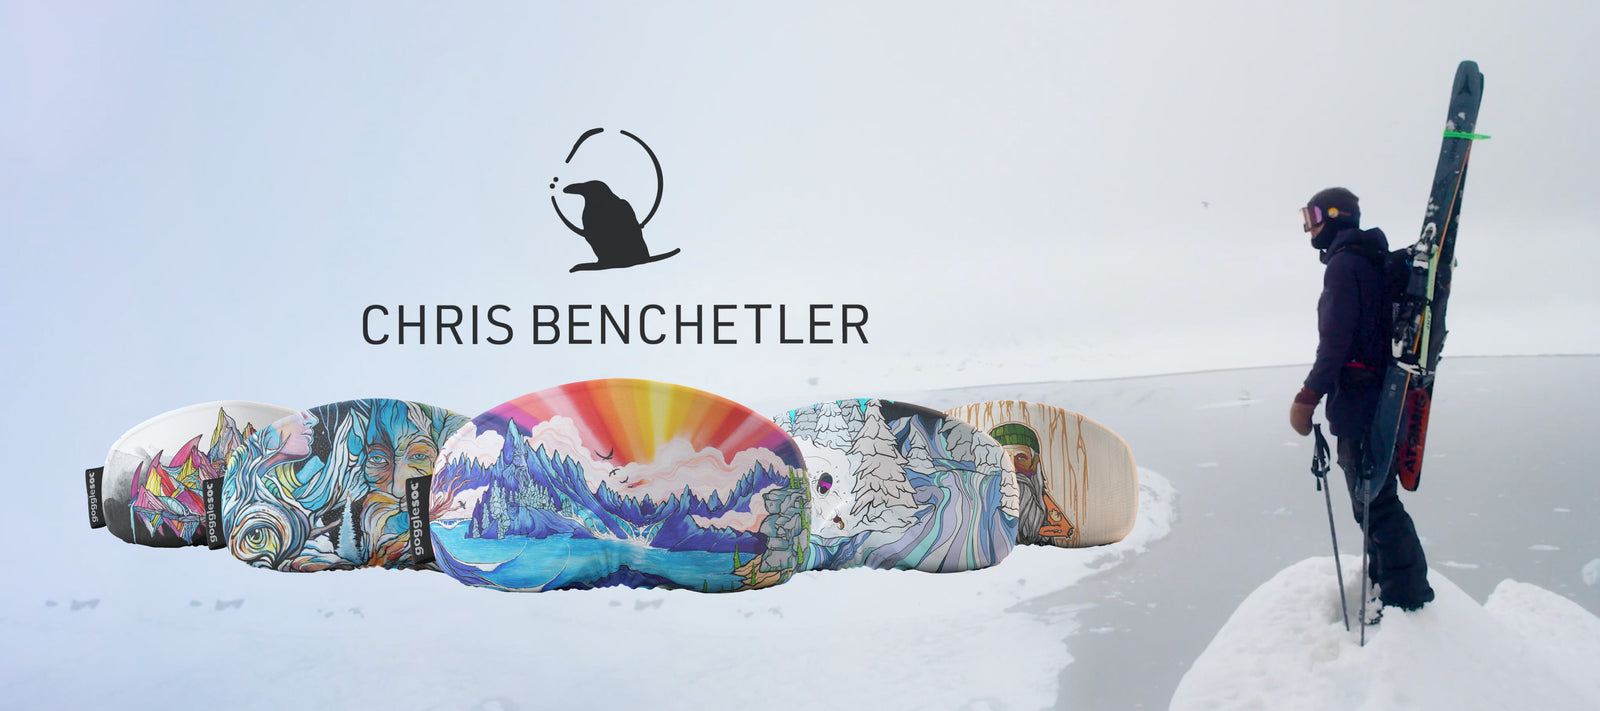 THE CHRIS BENCHETLER COLLECTION HAS DROPPED